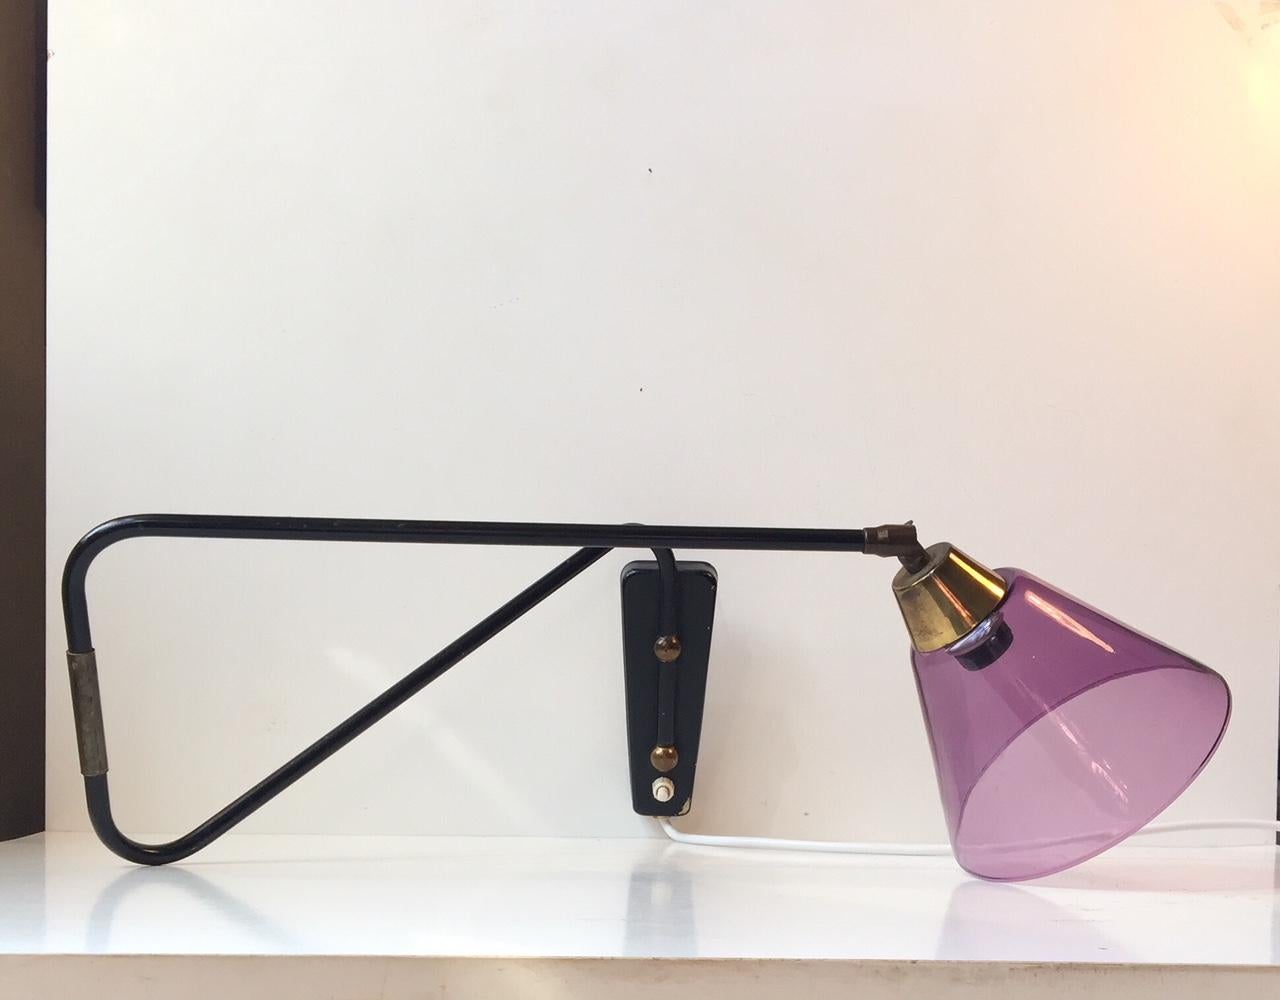 Fully adjustable wall lamp composed of steel, brass and a purple glass shade. It was possibly designed and manufactured by Th. Valentiner in Copenhagen. The style is reminiscent of Svend Aage Holm-Sørensen. The purple shade may have been a later